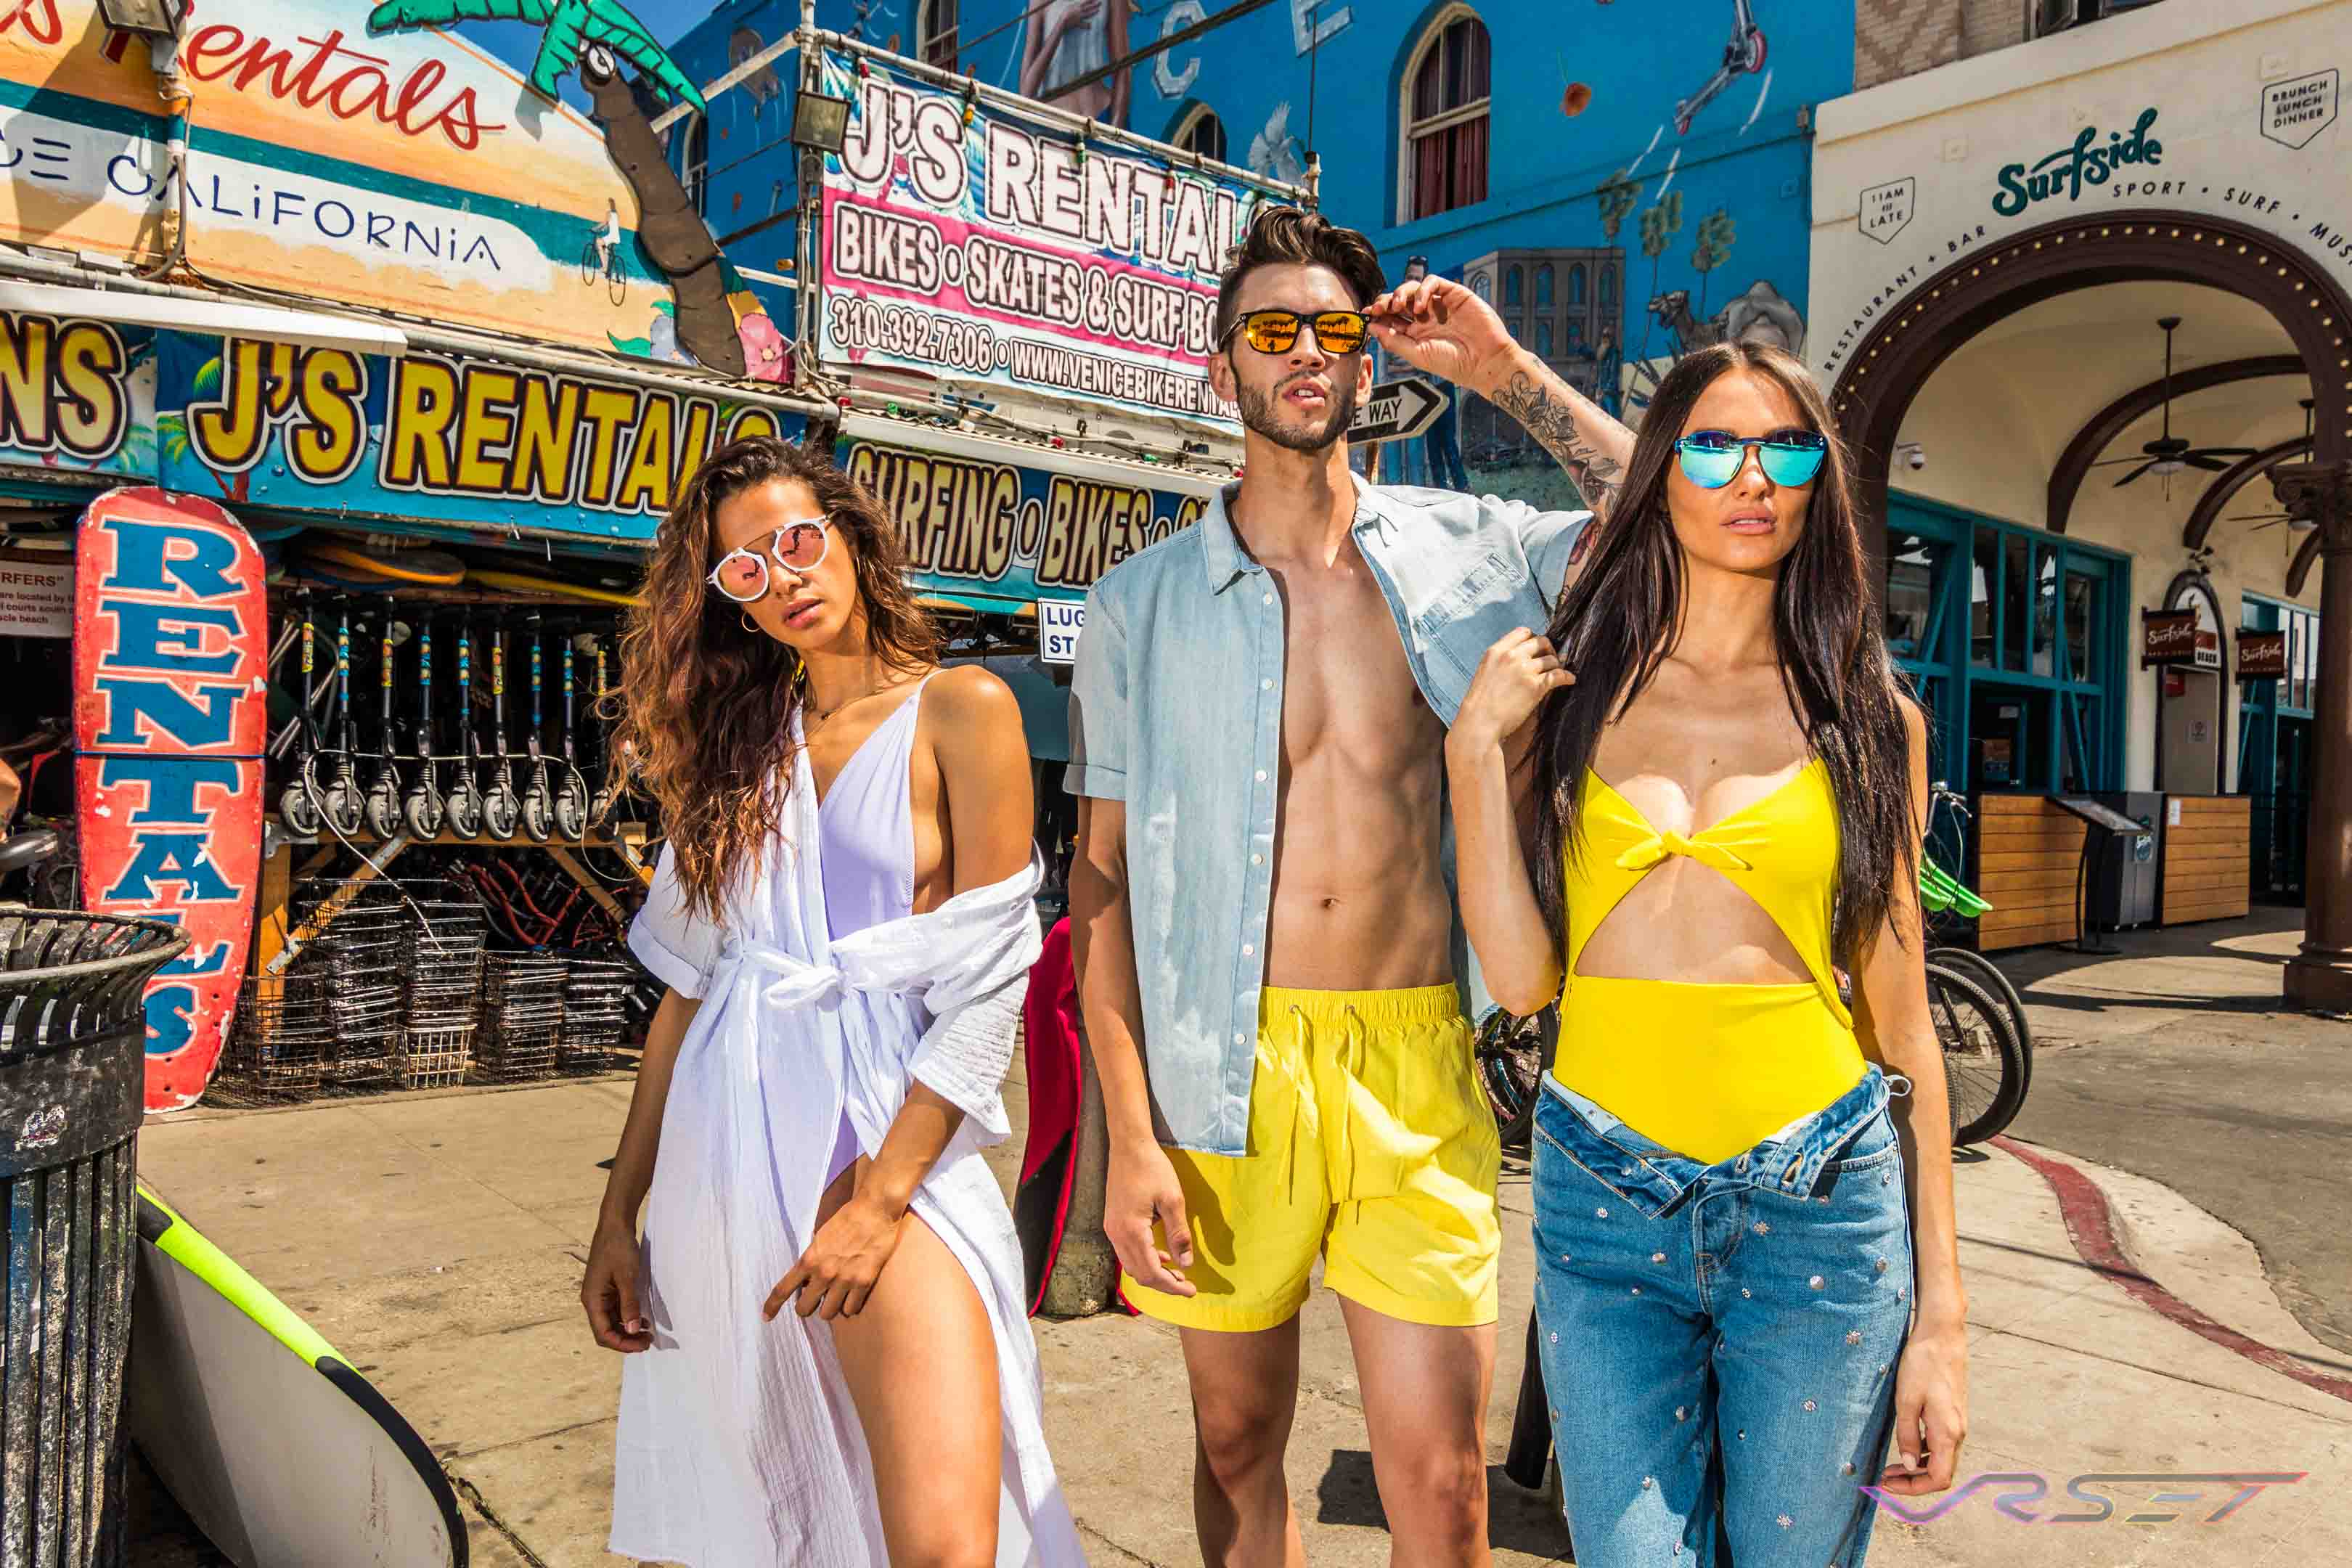 Dionspecs Eyewear Advertising Campaign Models Venice California Top Fashion Photographer Los Angeles Orange County Video Production David Victory